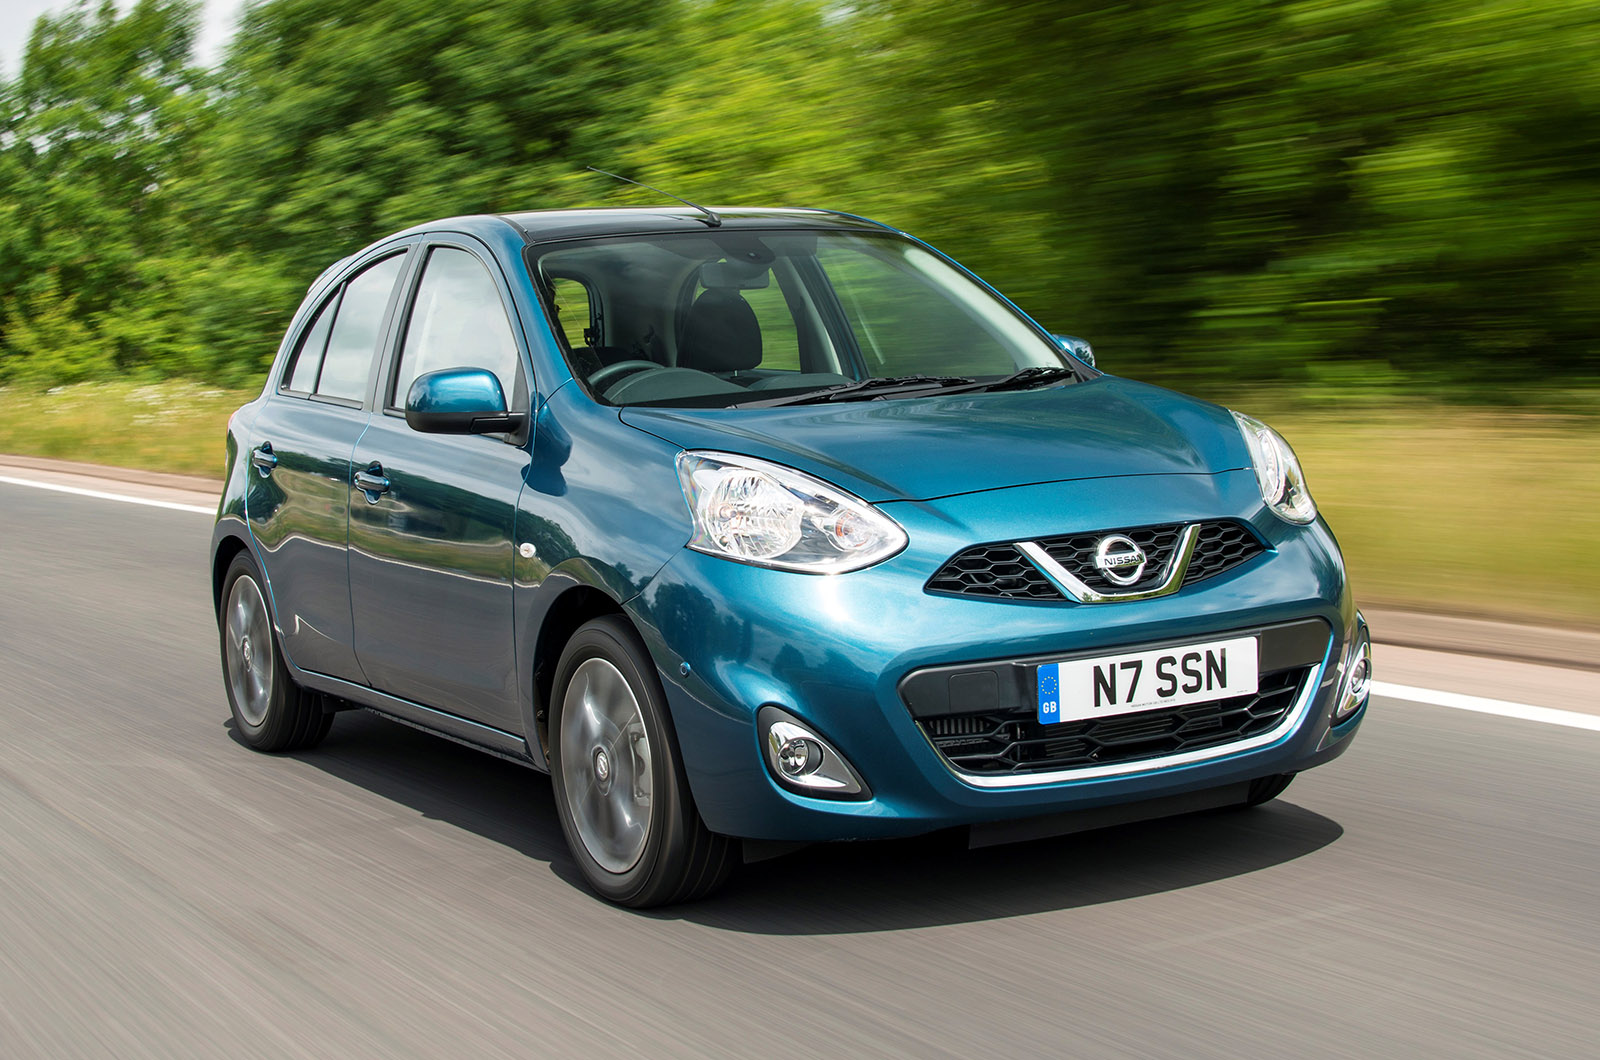 Used Nissan Micra 2010-2017 review